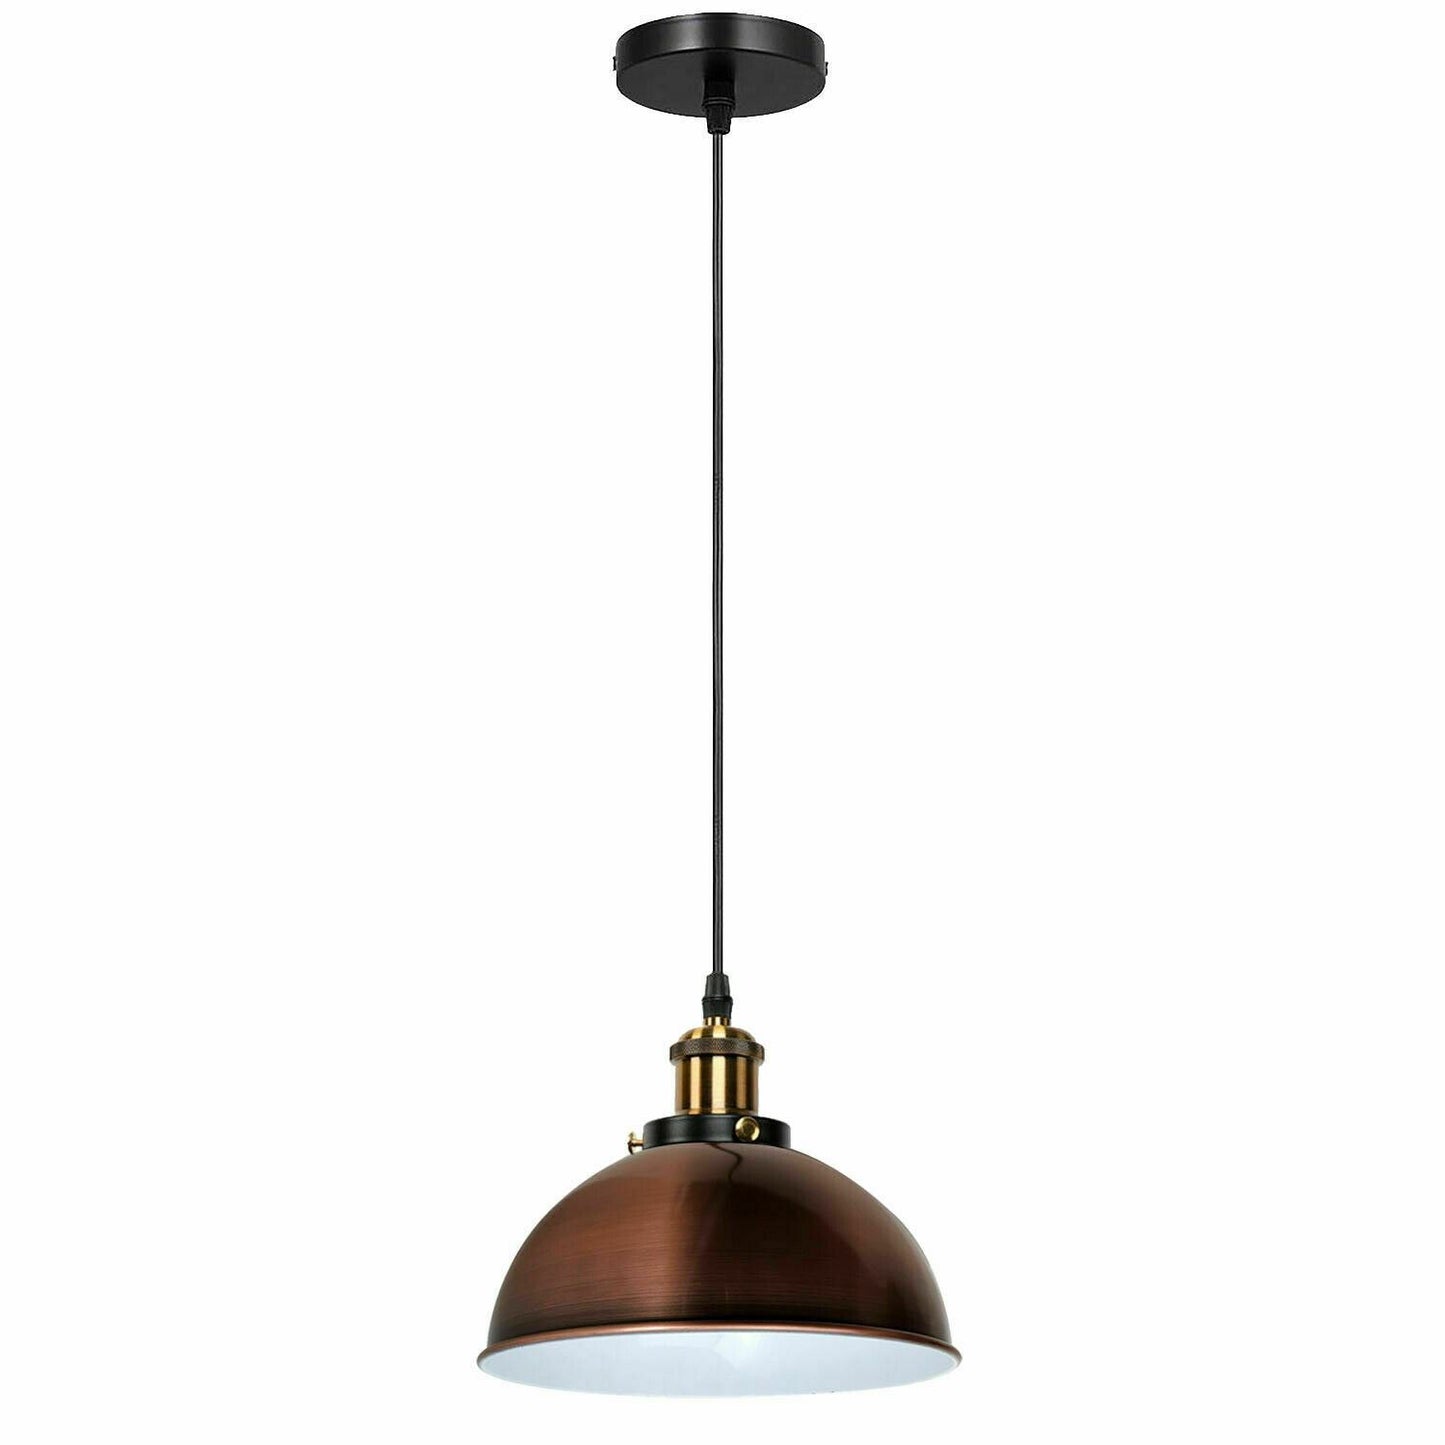 Vintage Modern Ceiling Pendant Light  Metal Dome Shade Hanging Indoor Light Fitting  With 95cm Adjustable Wire~2121